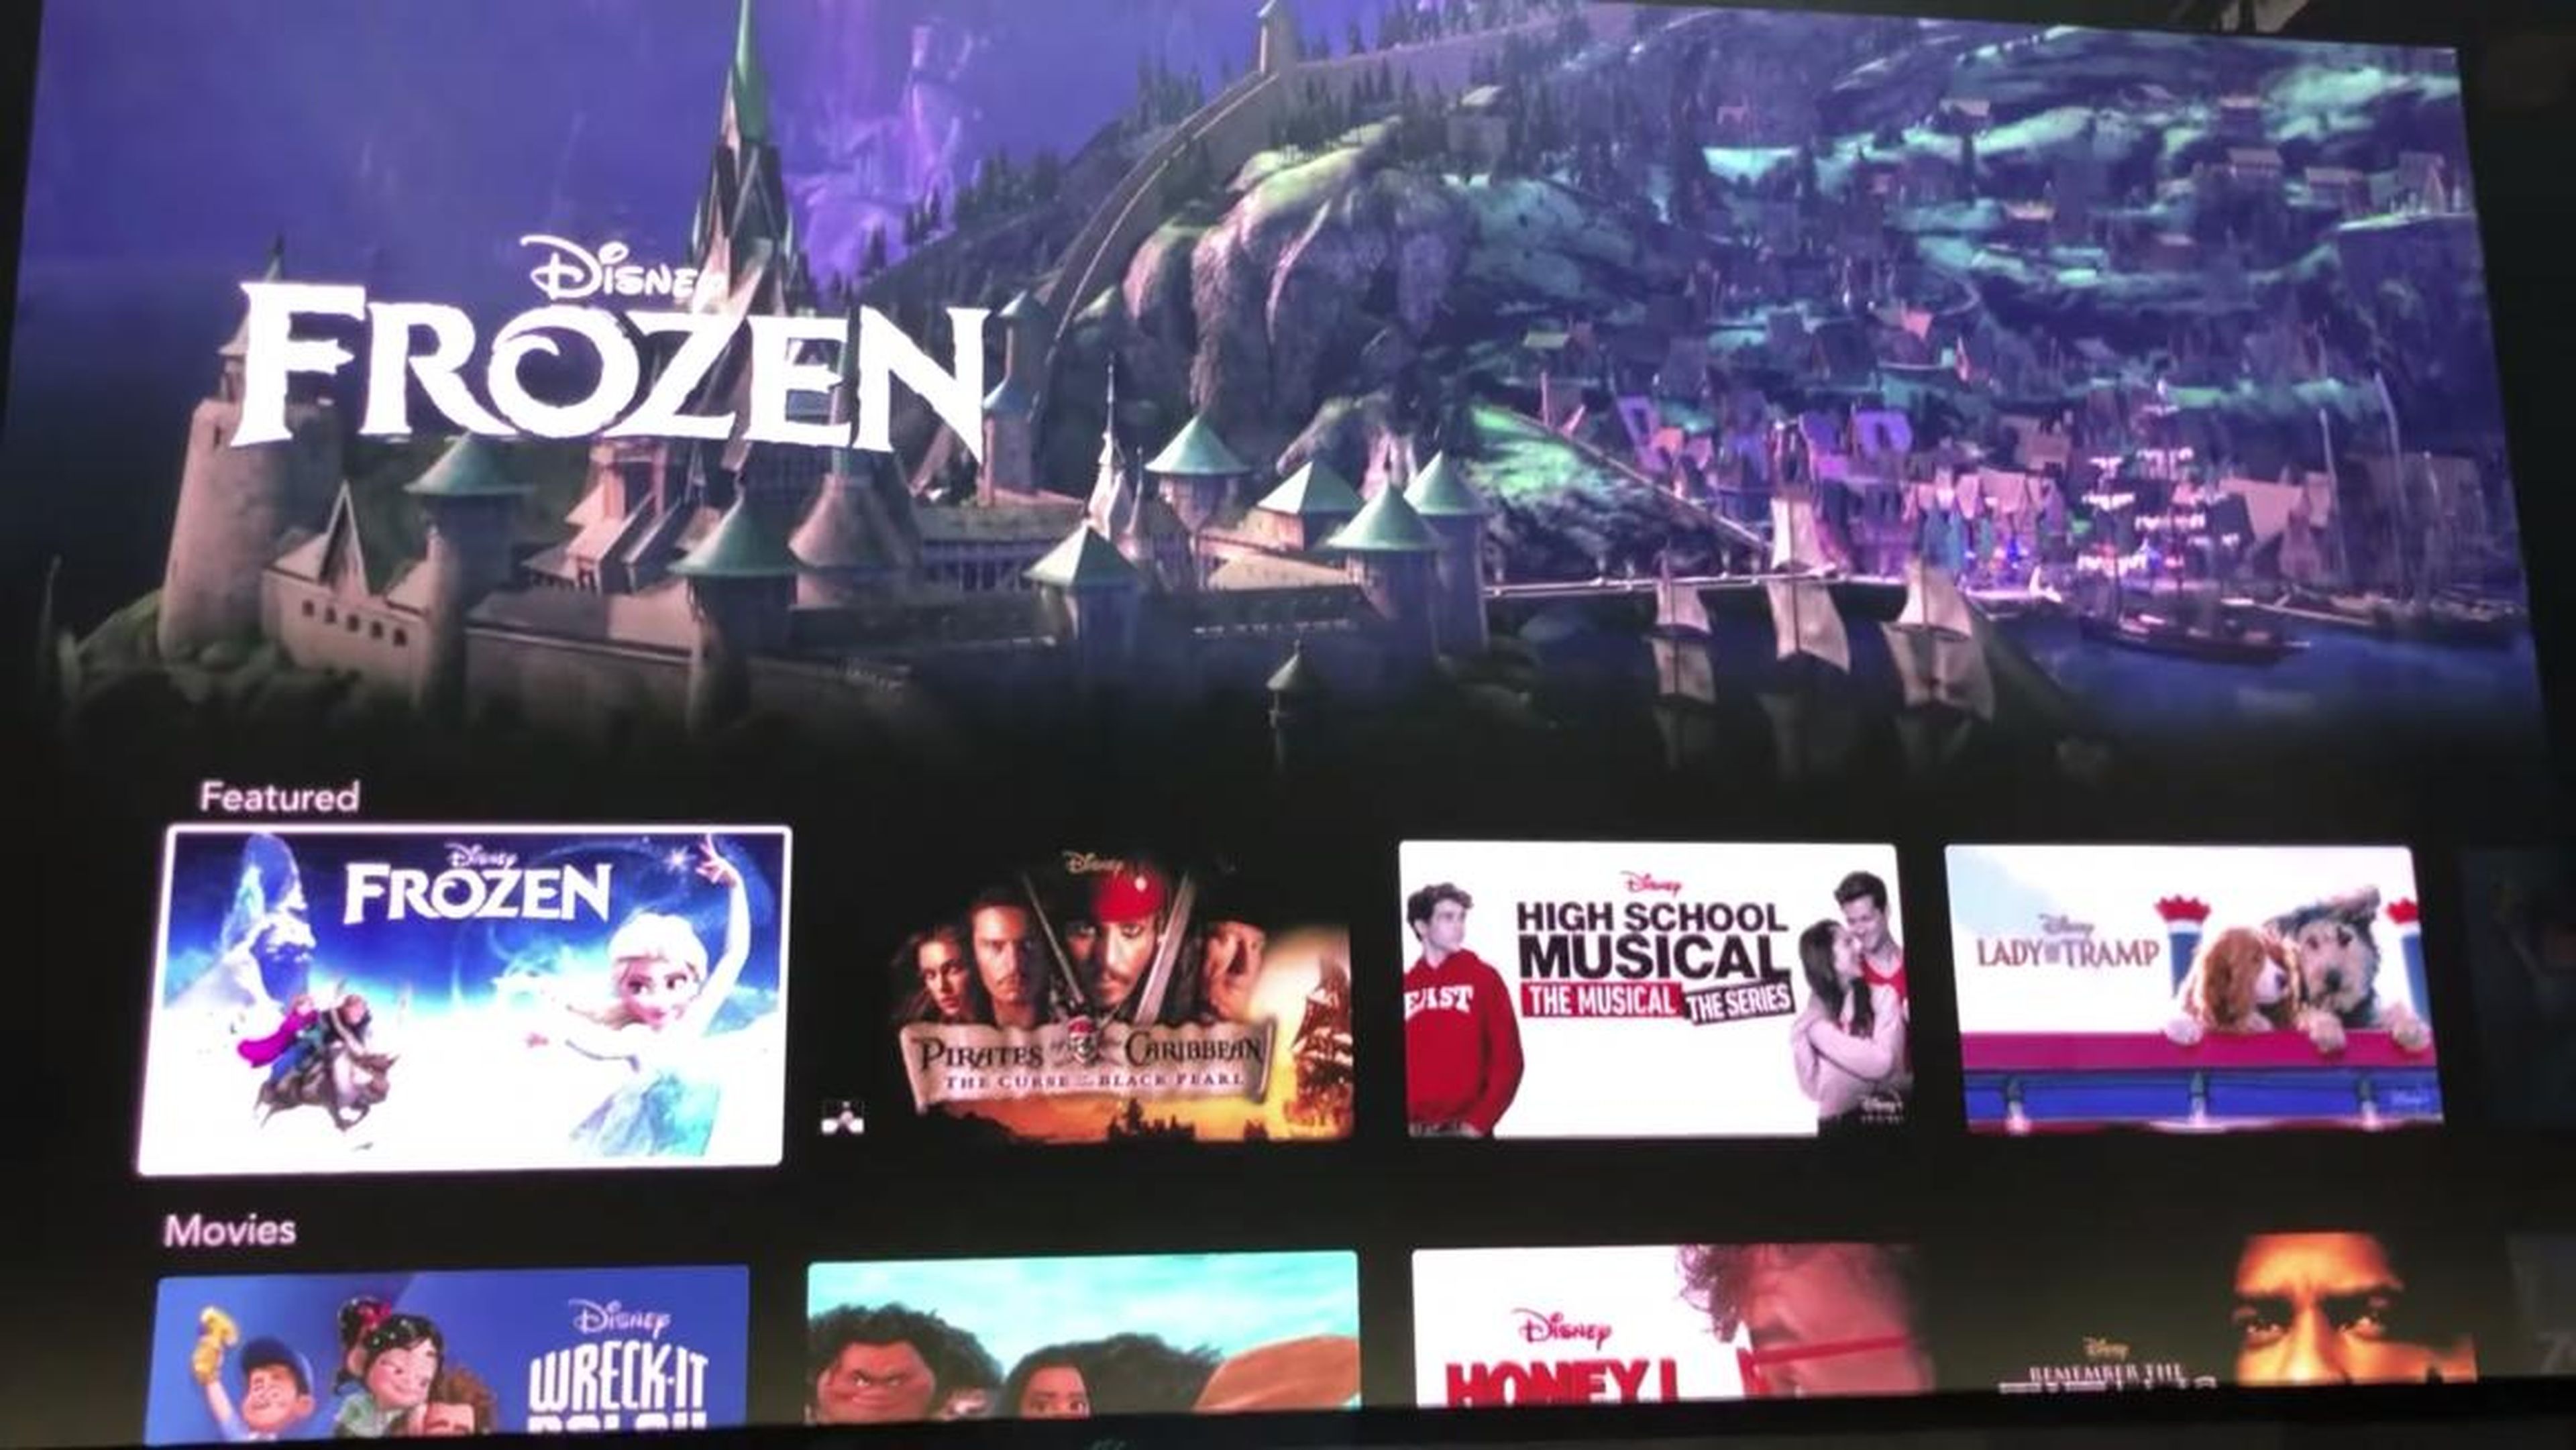 When you hover over a piece of content, like Disney's "Frozen," a brief trailer will automatically play at the top of the screen.